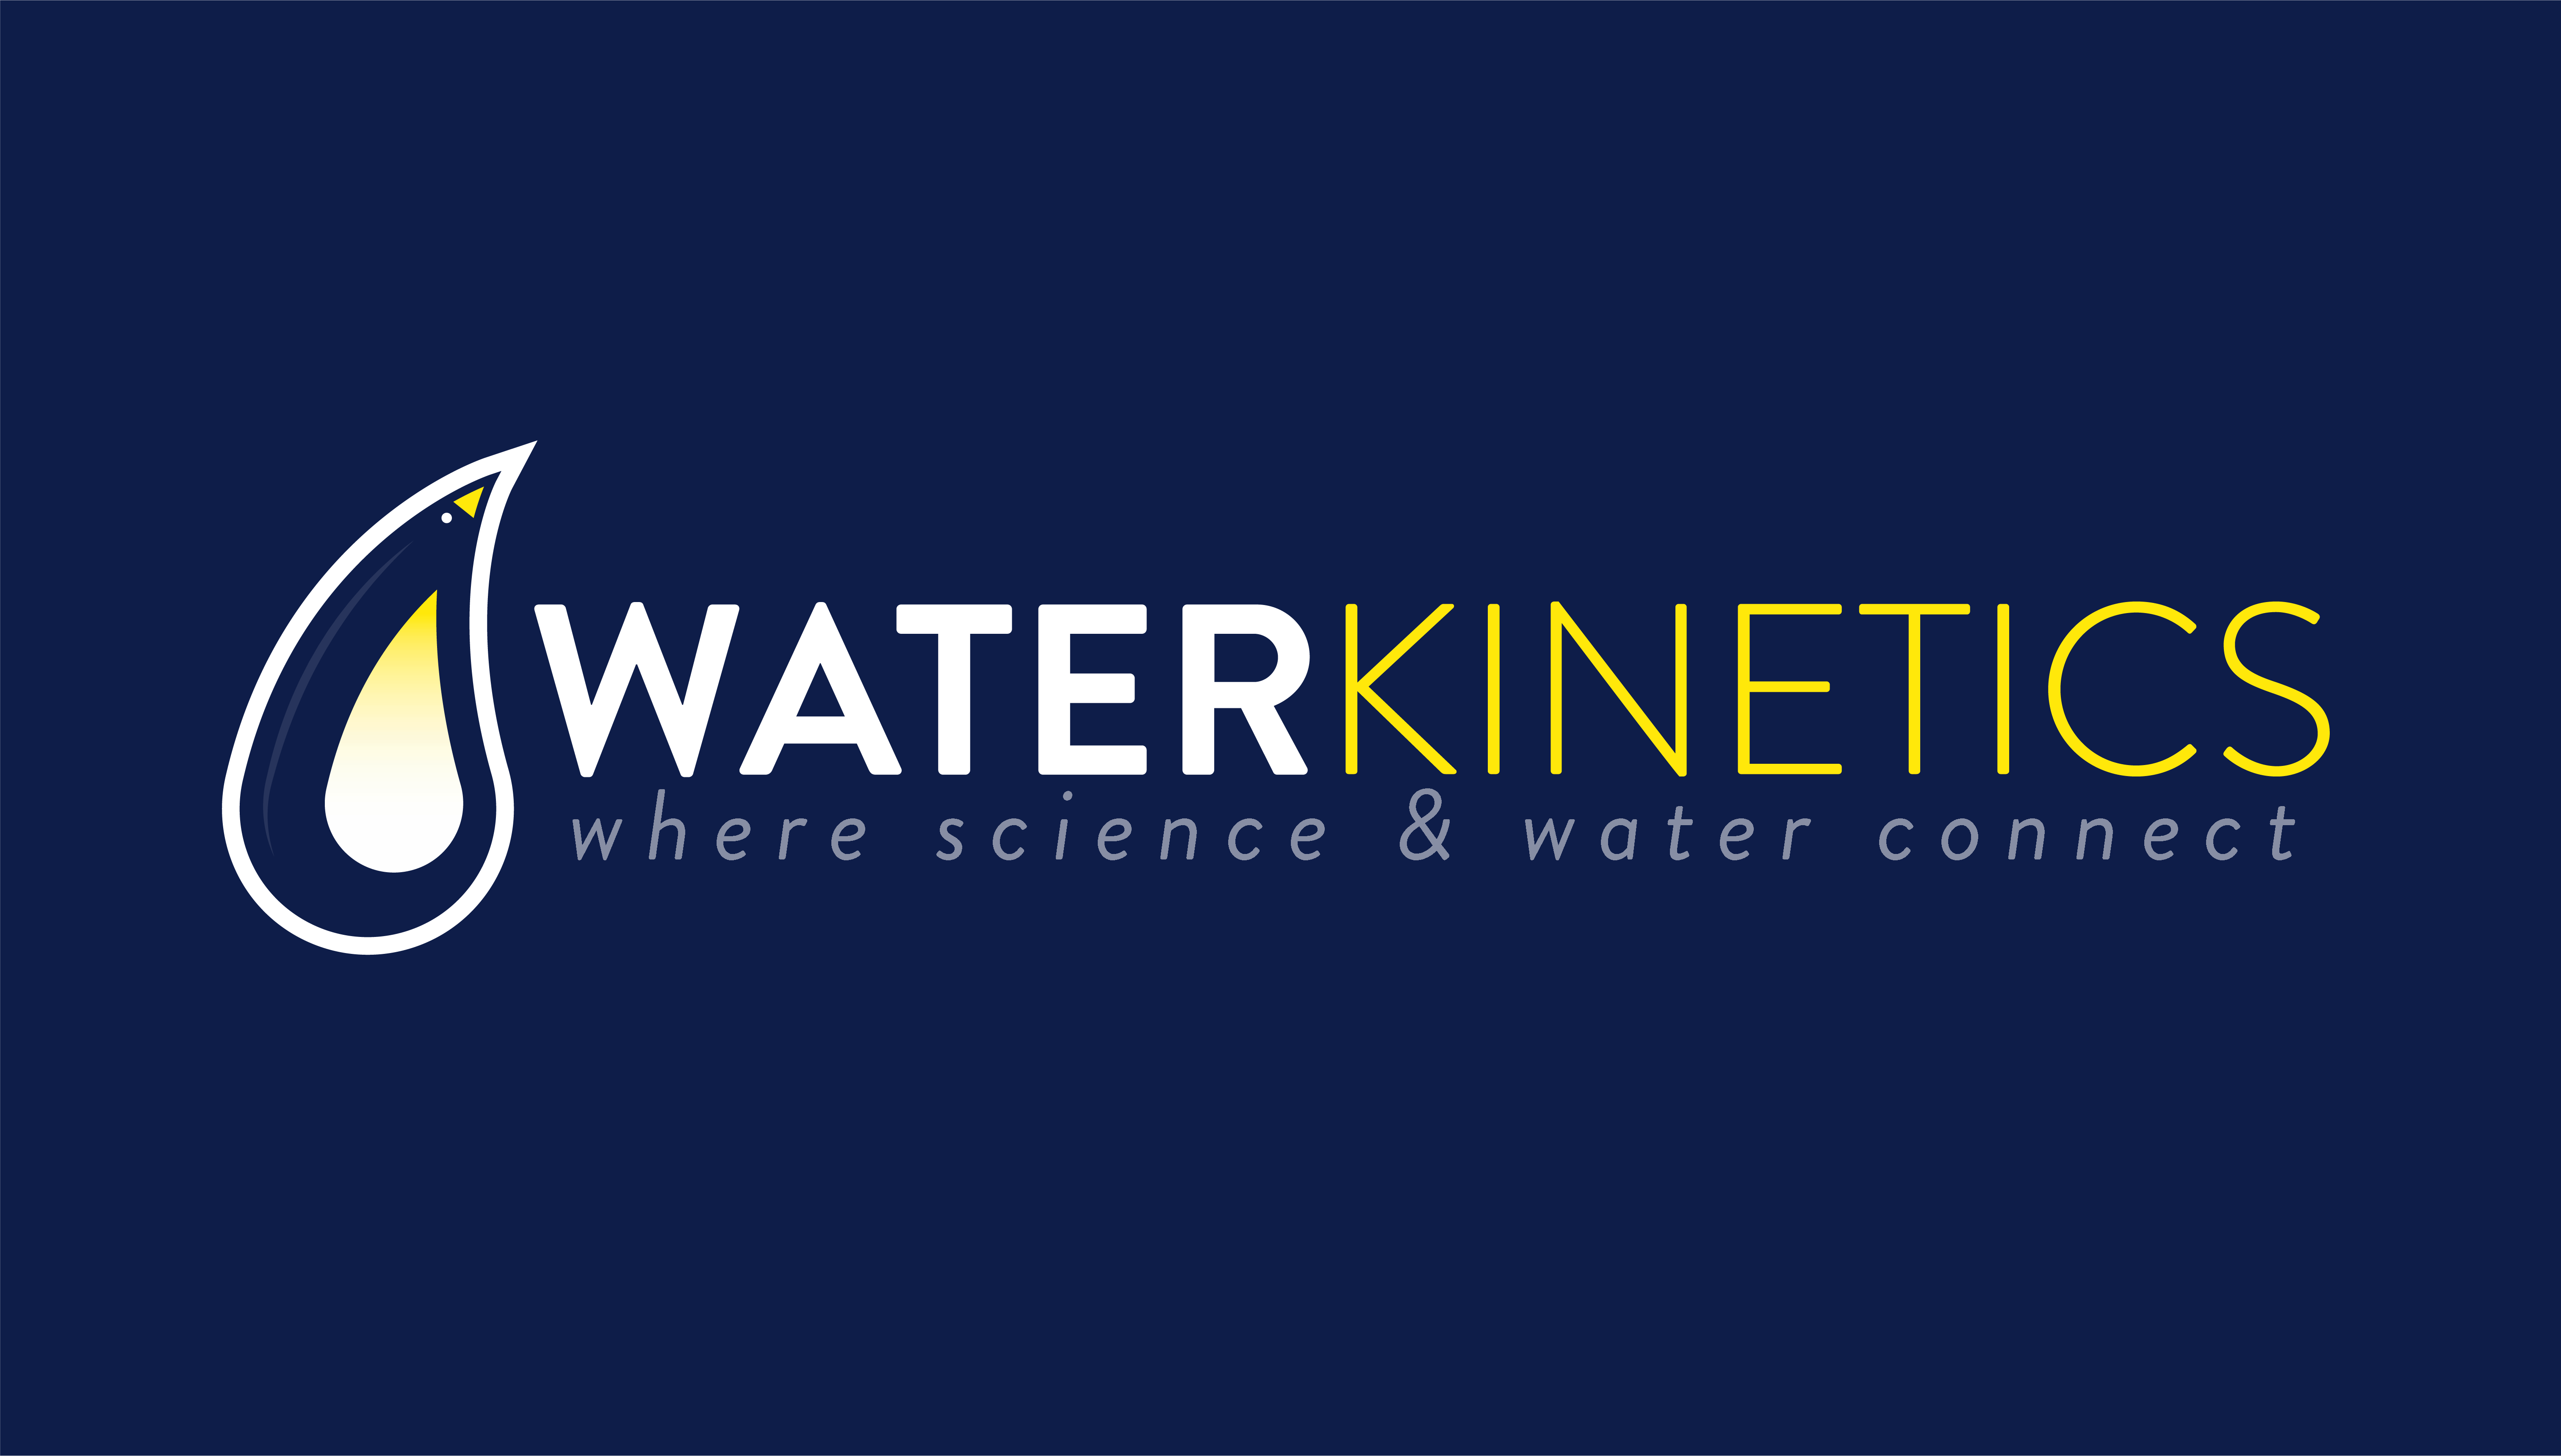 Linked logo for Water Kinetics